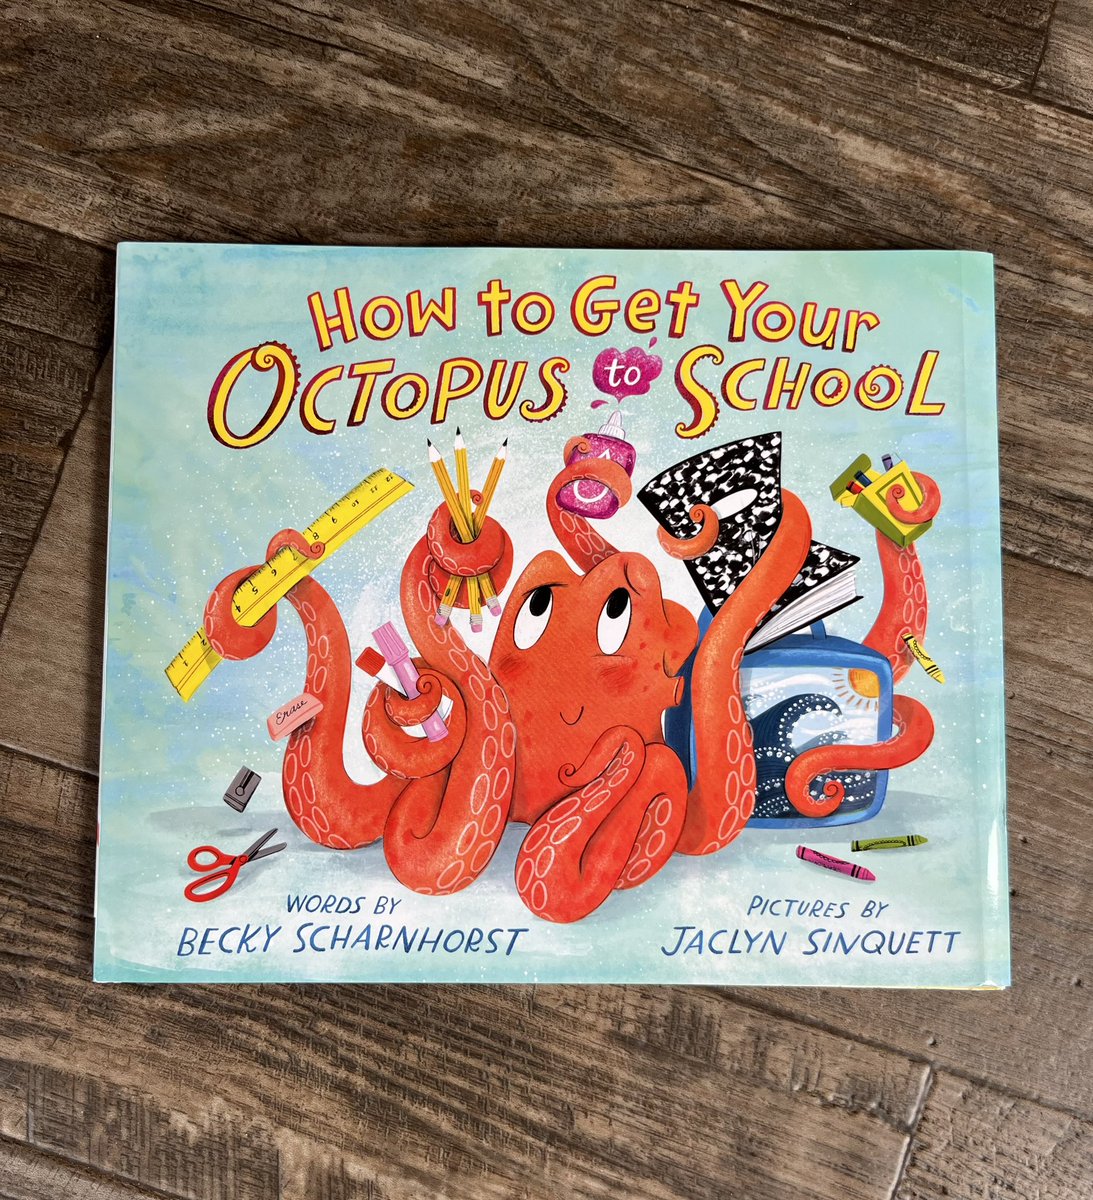 To celebrate the #bookbirthday of HOW TO GET YOUR OCTOPUS TO SCHOOL, I’m giving away 3 copies! RT & like to enter!

If you also sing the happy birthday song the #giveaway gods will look favorably upon you. 😁@penguinkids #JaclynSinquett 

US only. Winners announced 5/23.